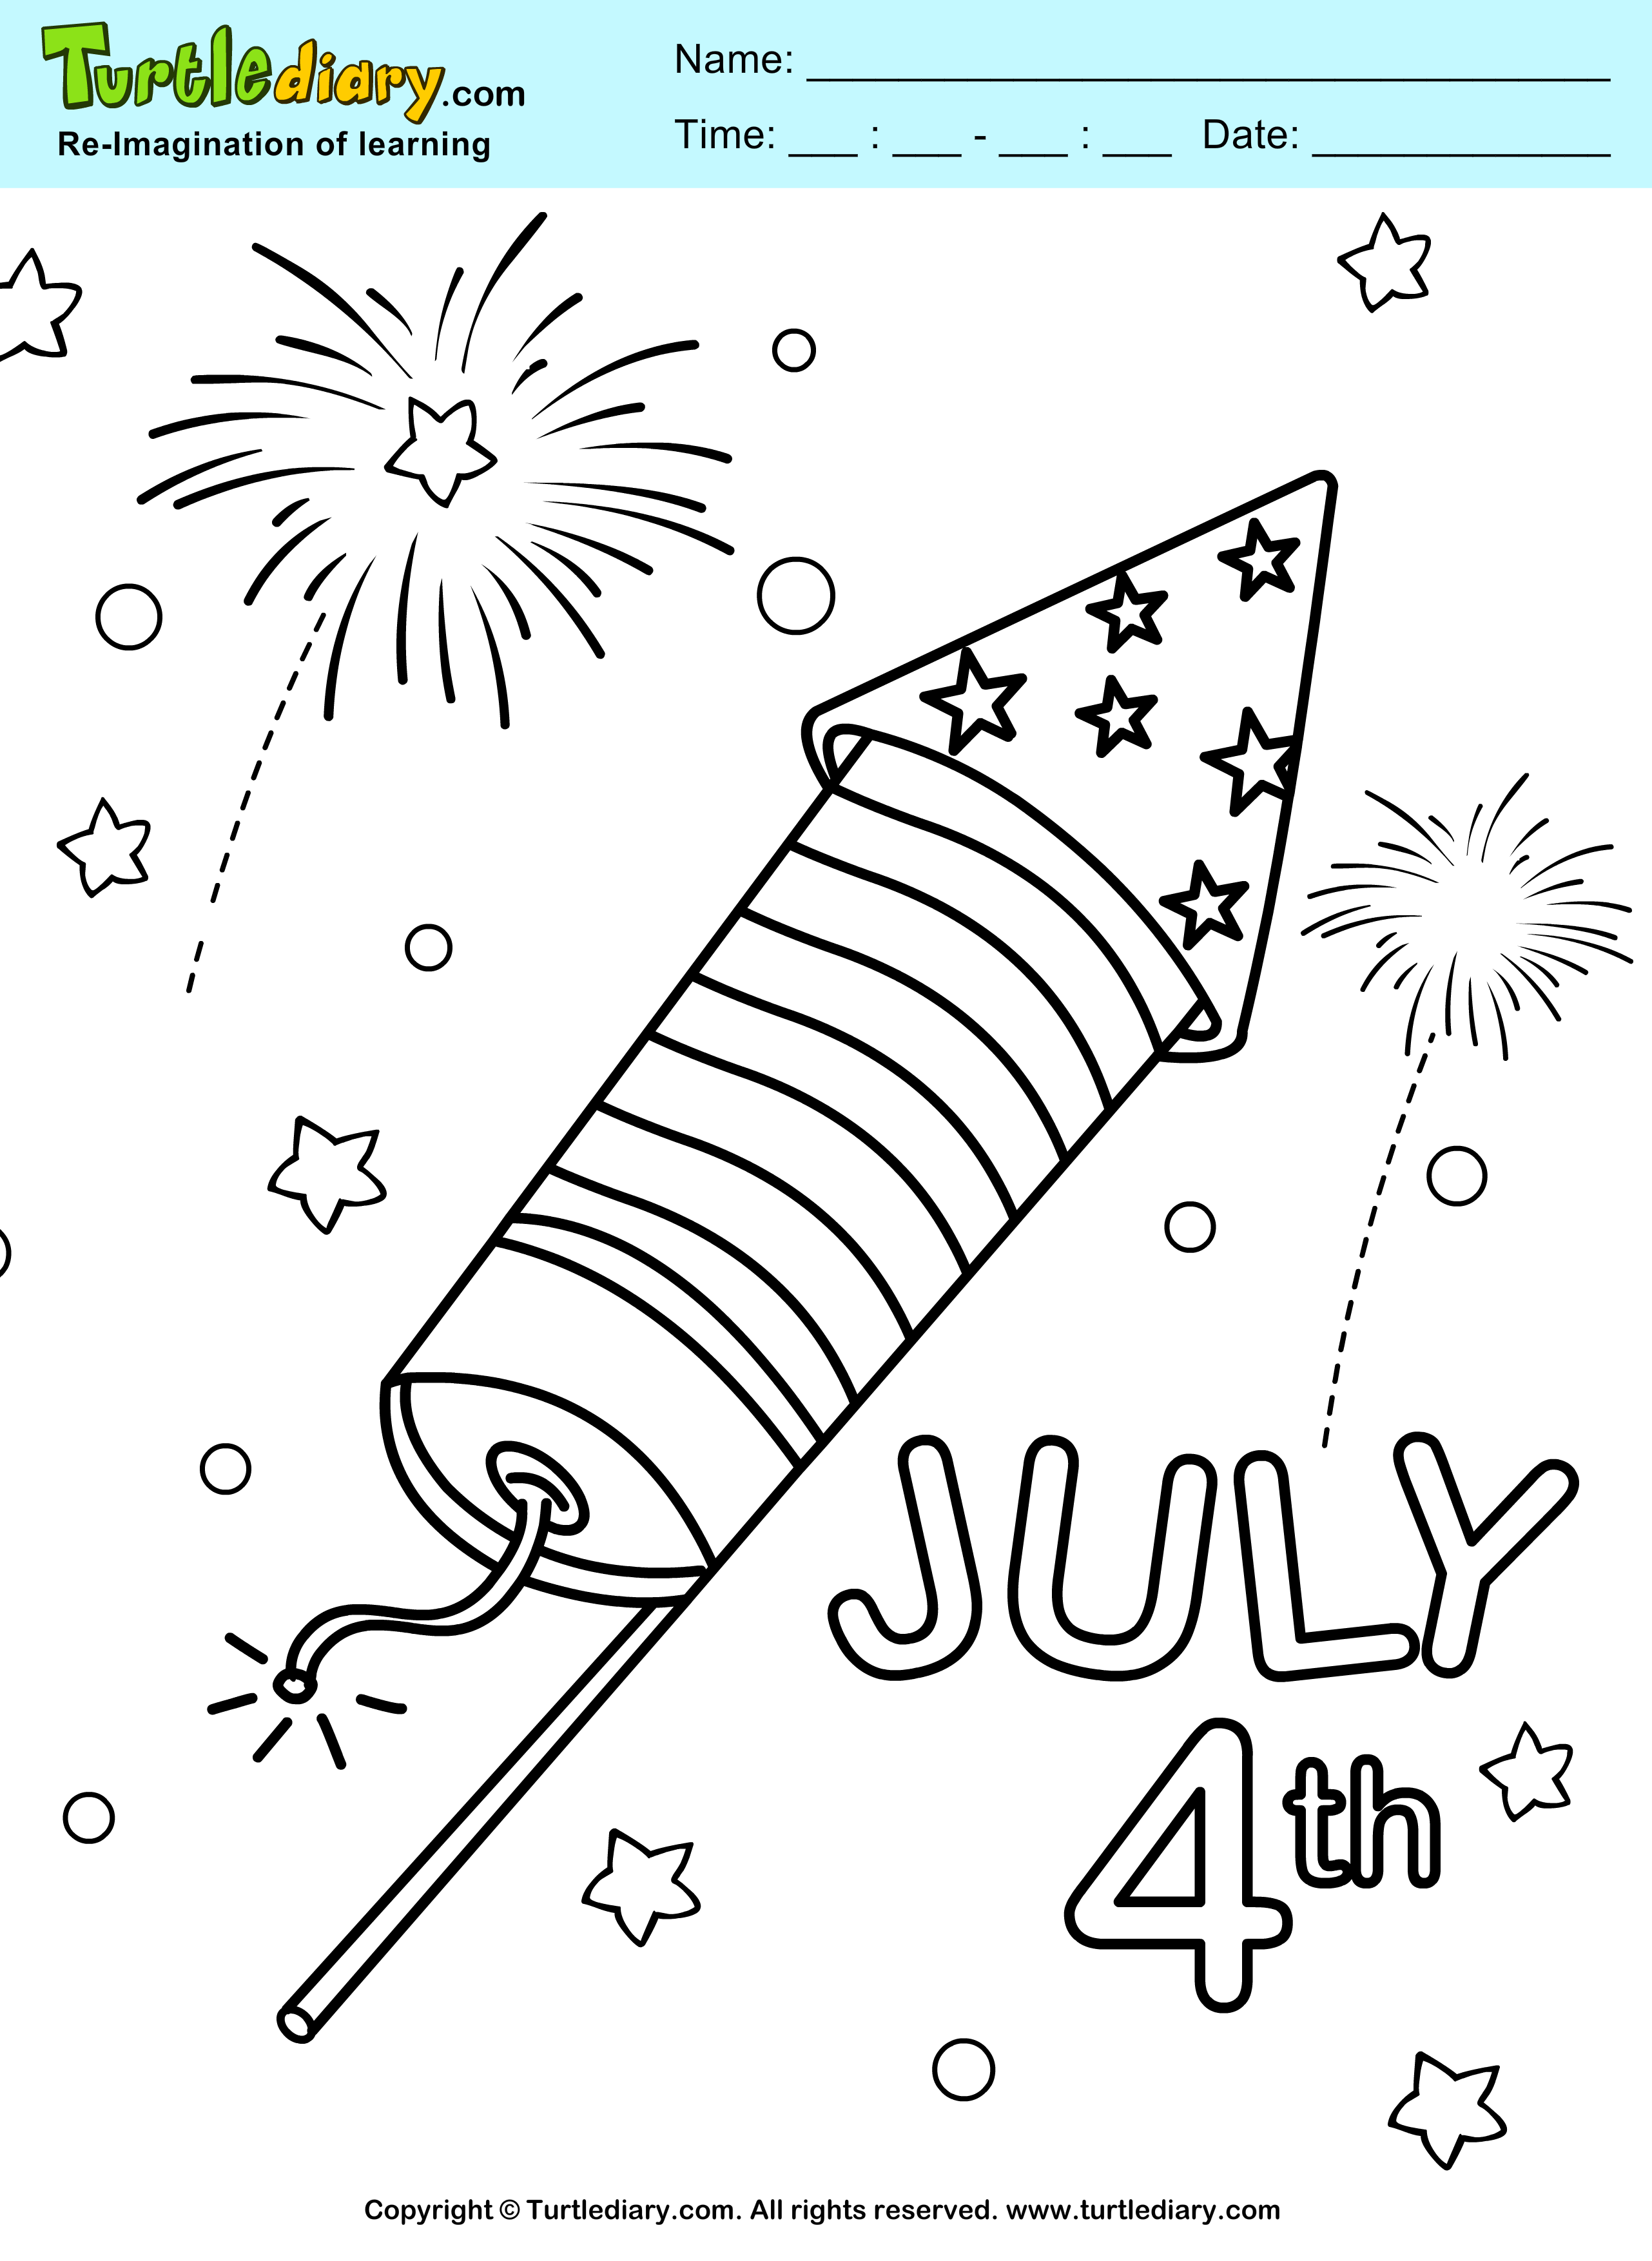 July 4th Coloring Pages Preschool – Coloring pages july fourth 4th kids preschoolers printable sheets color preschool flag american fireworks printables fire colouring print adults activities